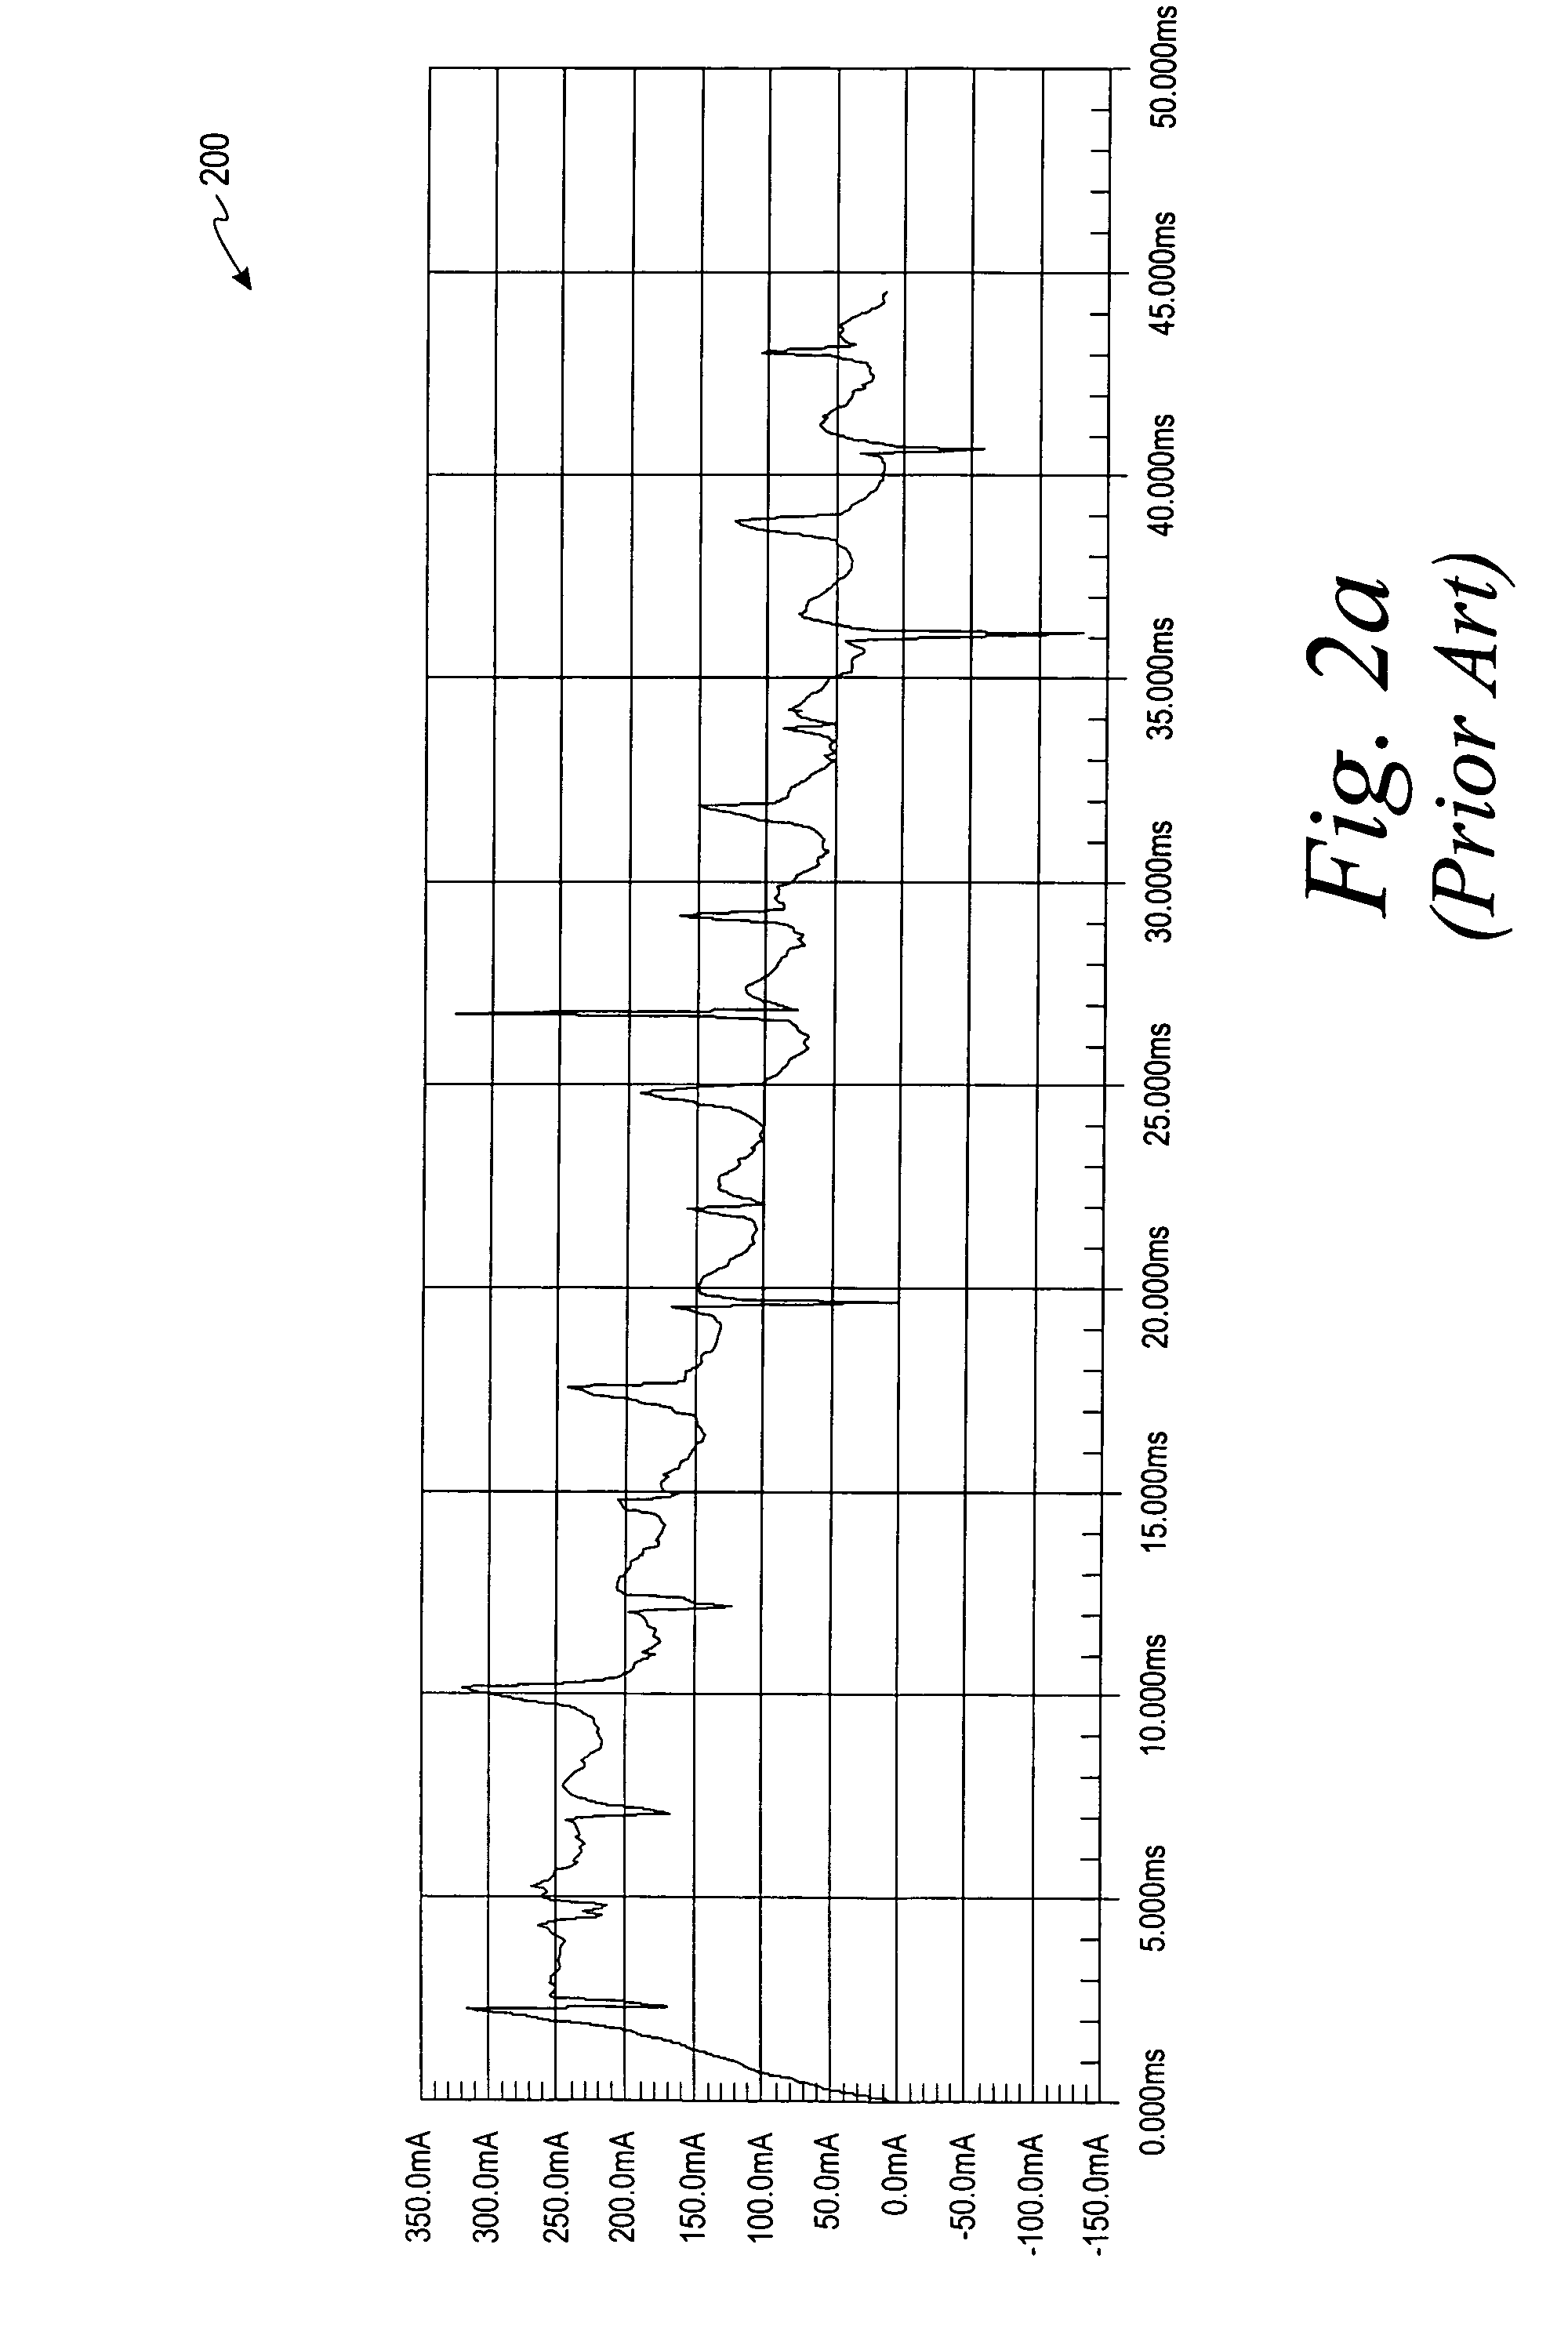 Contact verification method for a transfer switch mechanism